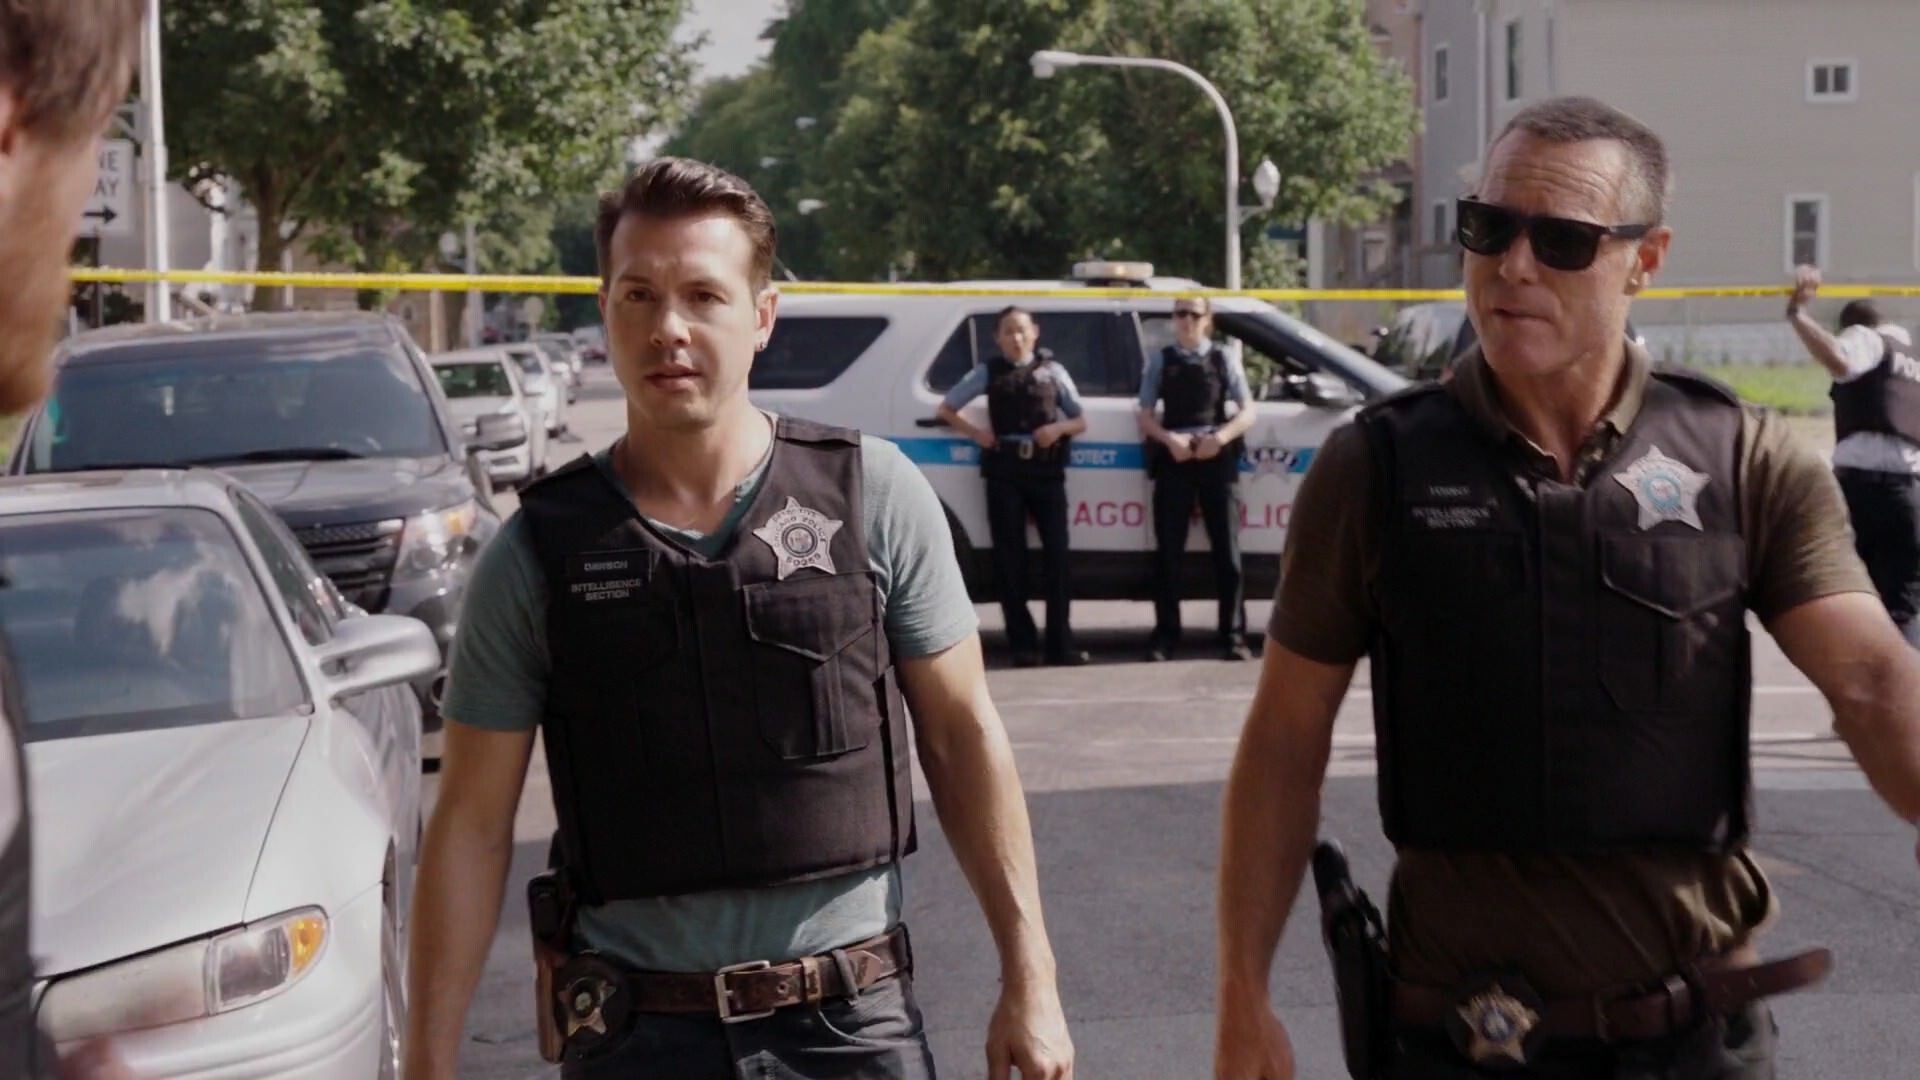 Chicago P.D. (TV Series): Antonio Dawson, The Older Brother Of Character Gabriela "Gabby" Dawson From Related Show "Chicago Fire", Crossover. 1920x1080 Full HD Wallpaper.